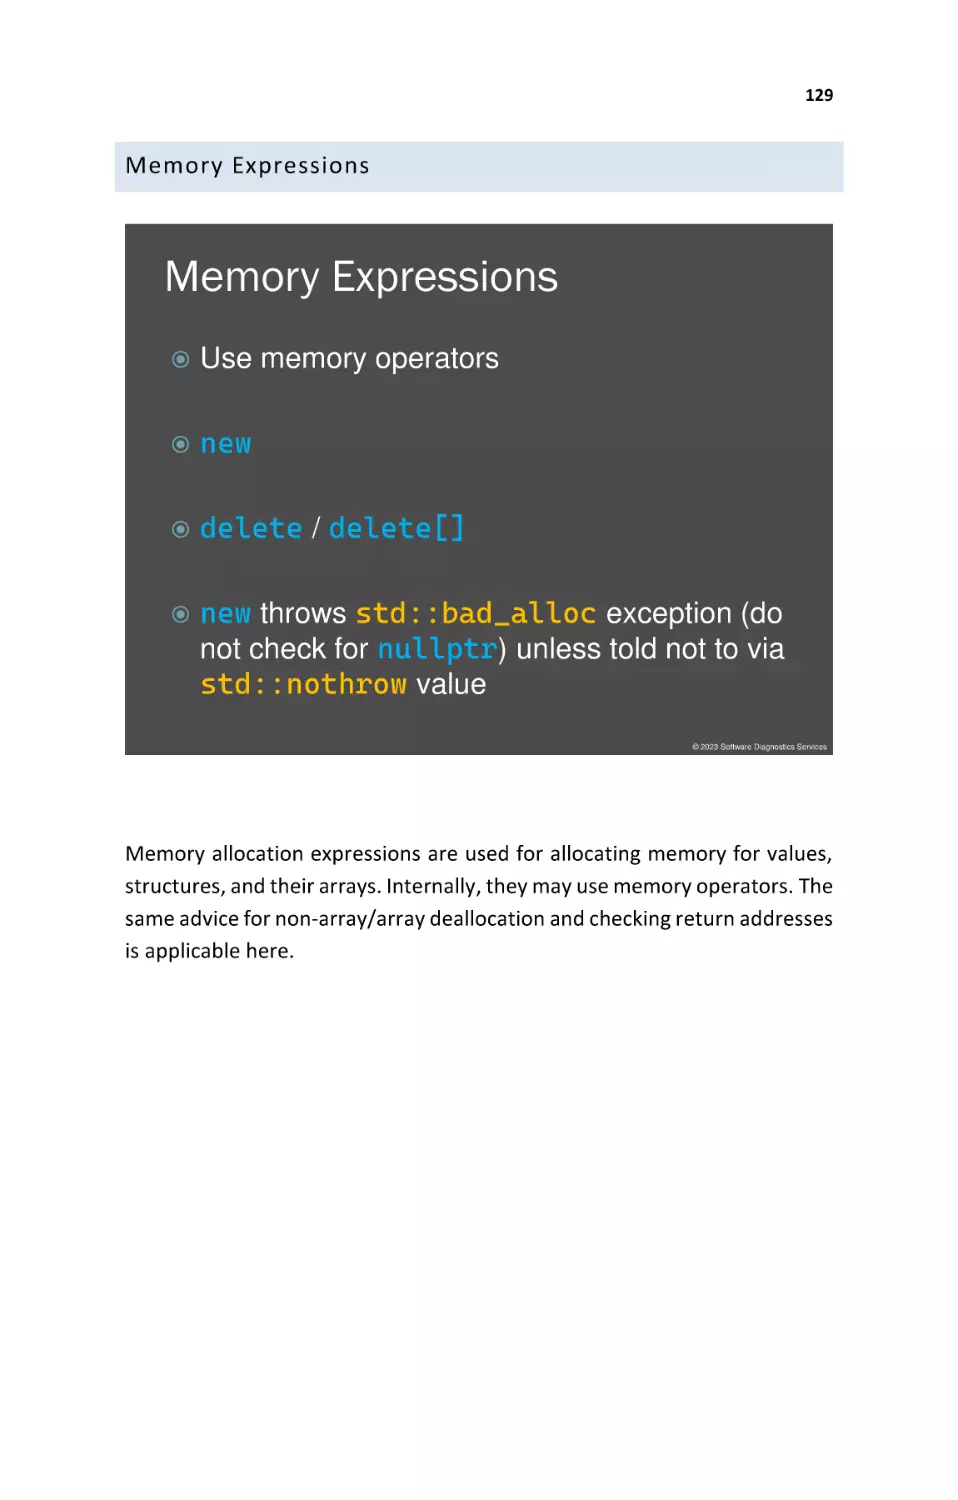 Memory Expressions